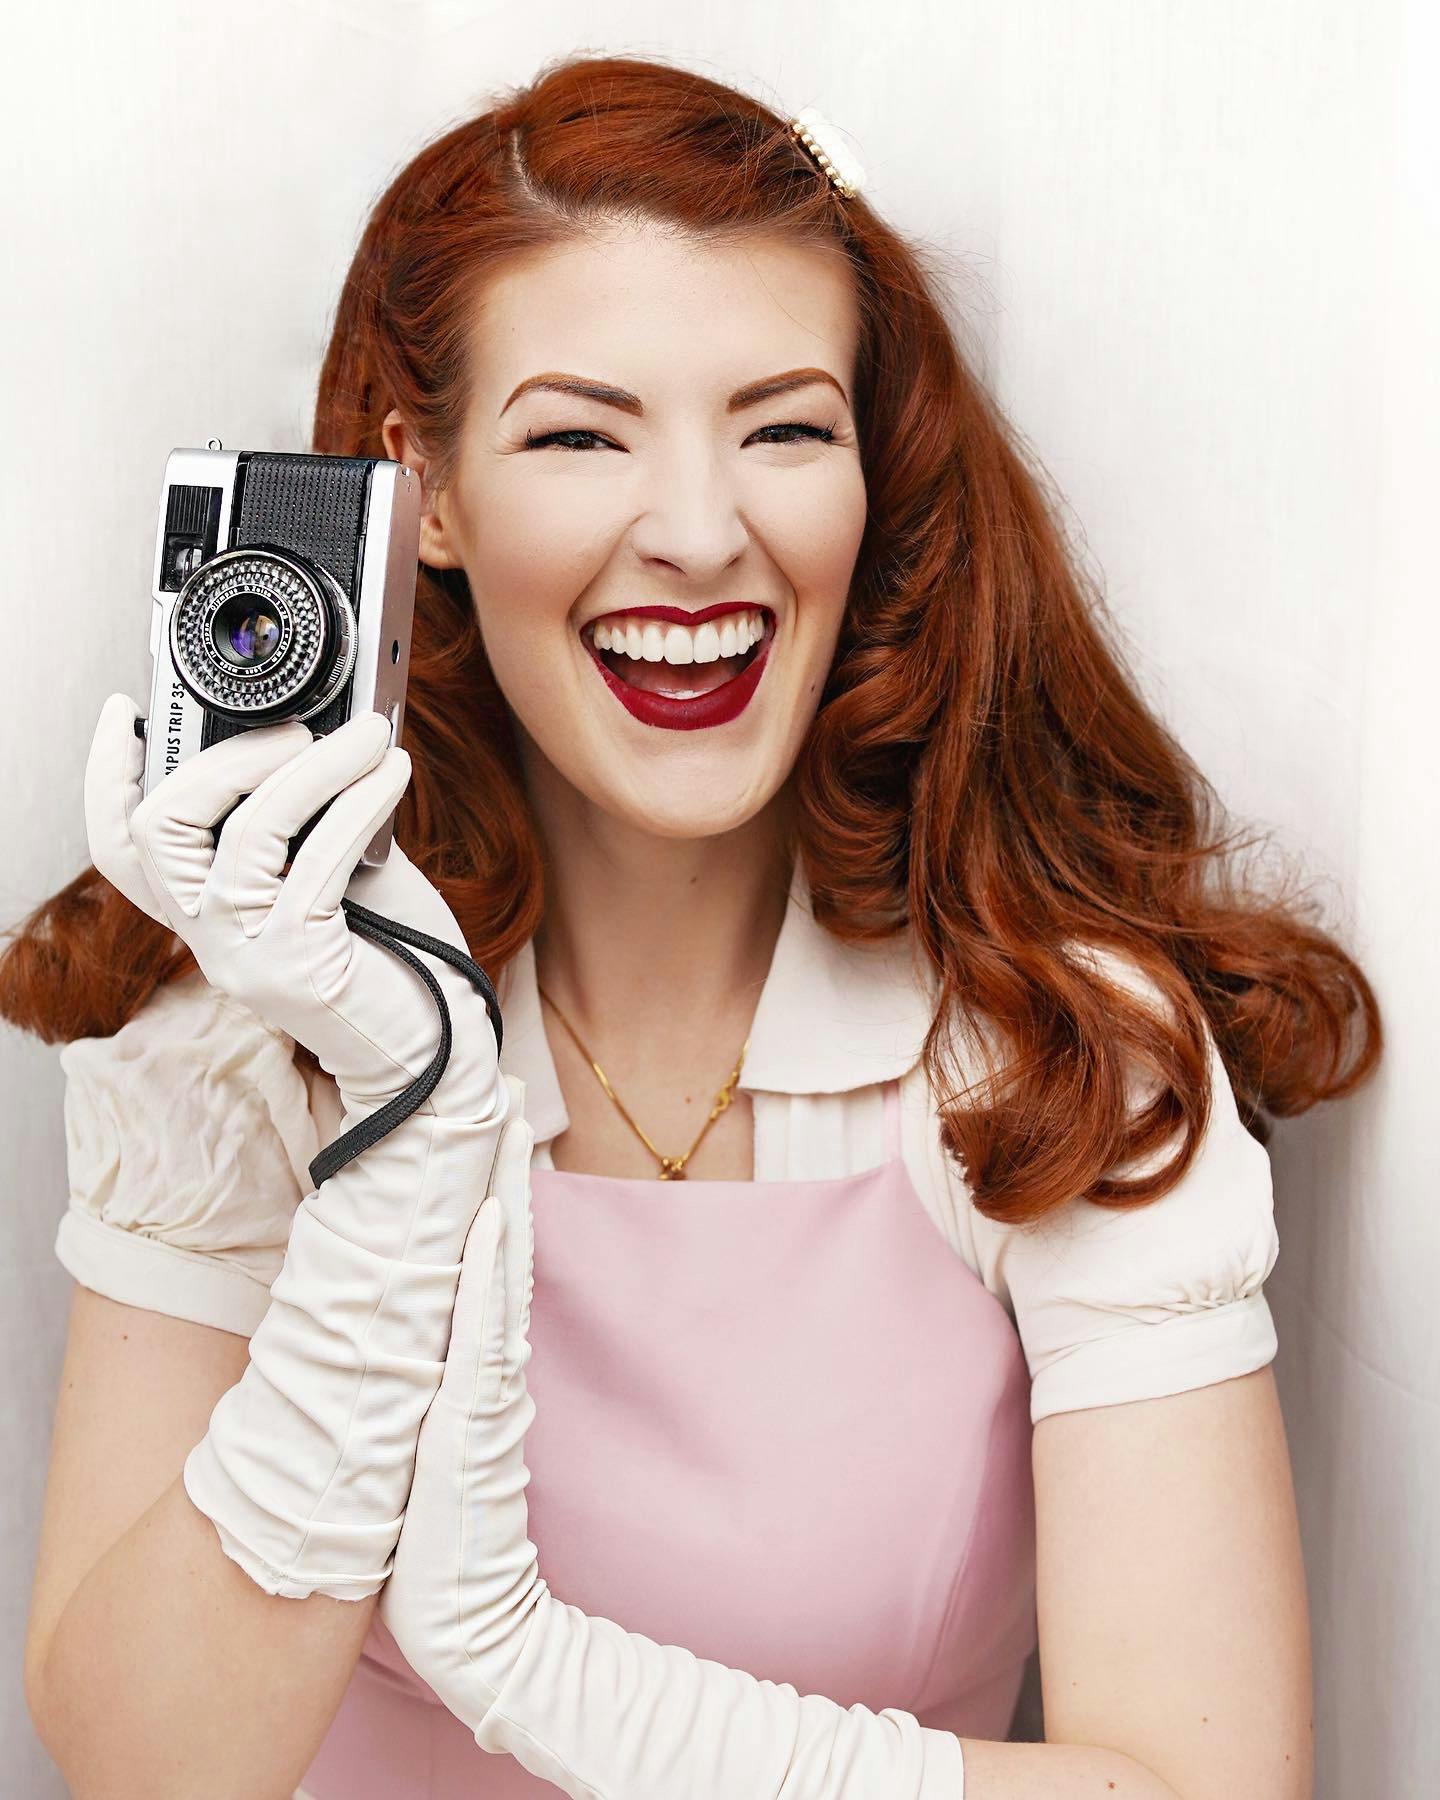 Jessica, a thirtysomething white woman stands in front of a white background. She is wearing a vintage-inspired outfit with gloves and has red hair. She is holding a vintage camera.